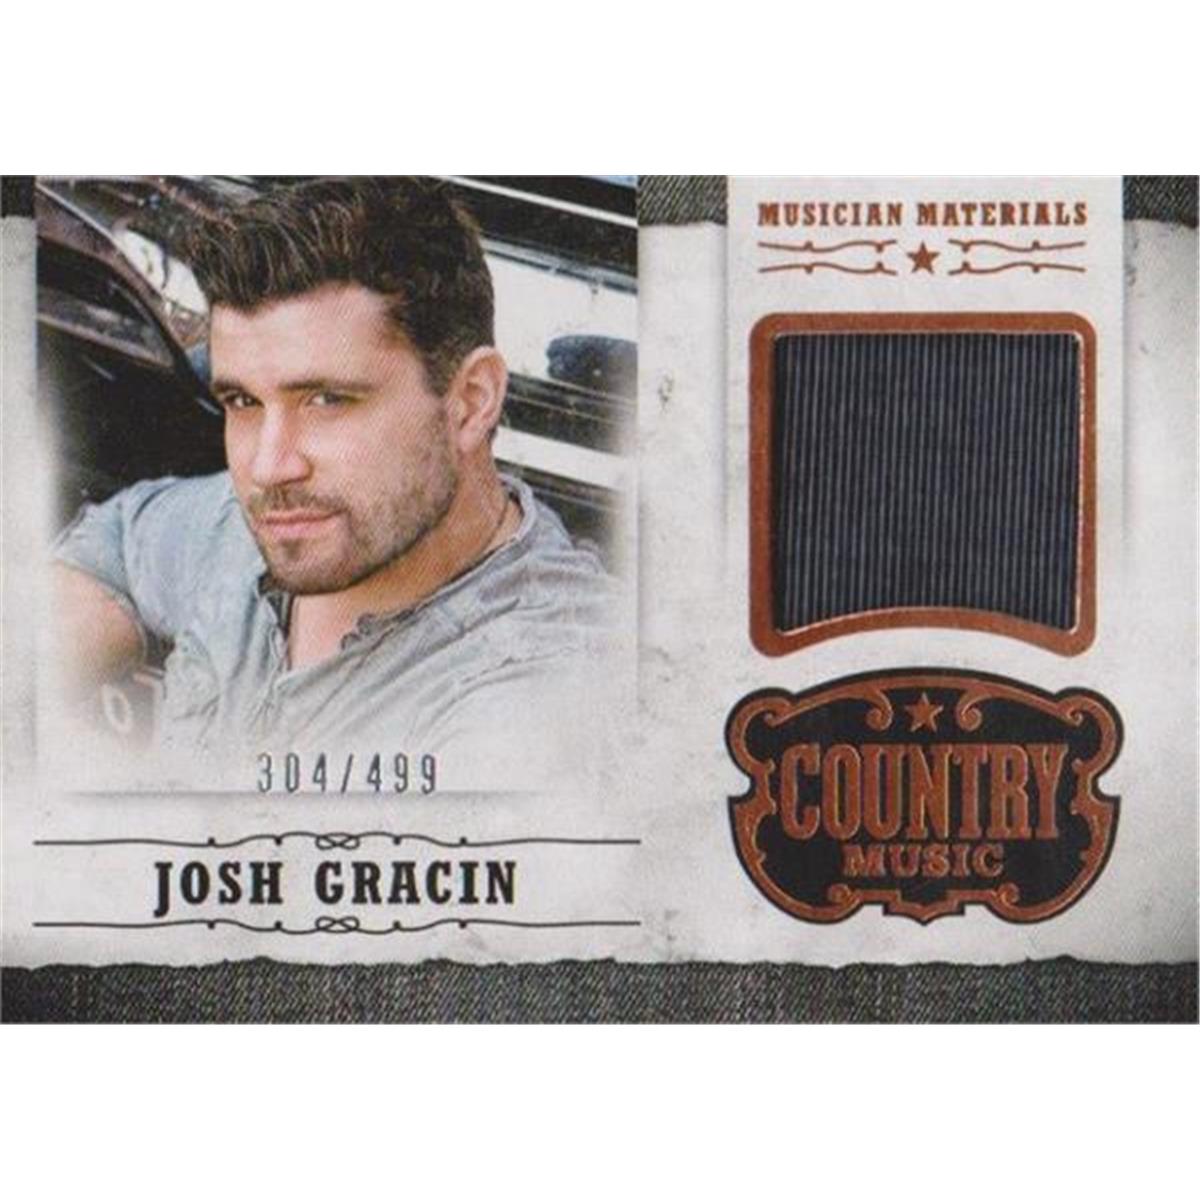 Picture of Autograph Warehouse 409085 Josh Gracin Musician Worn Material Relic Patch Trading Card - 2014 Panini MJG LE 304-499